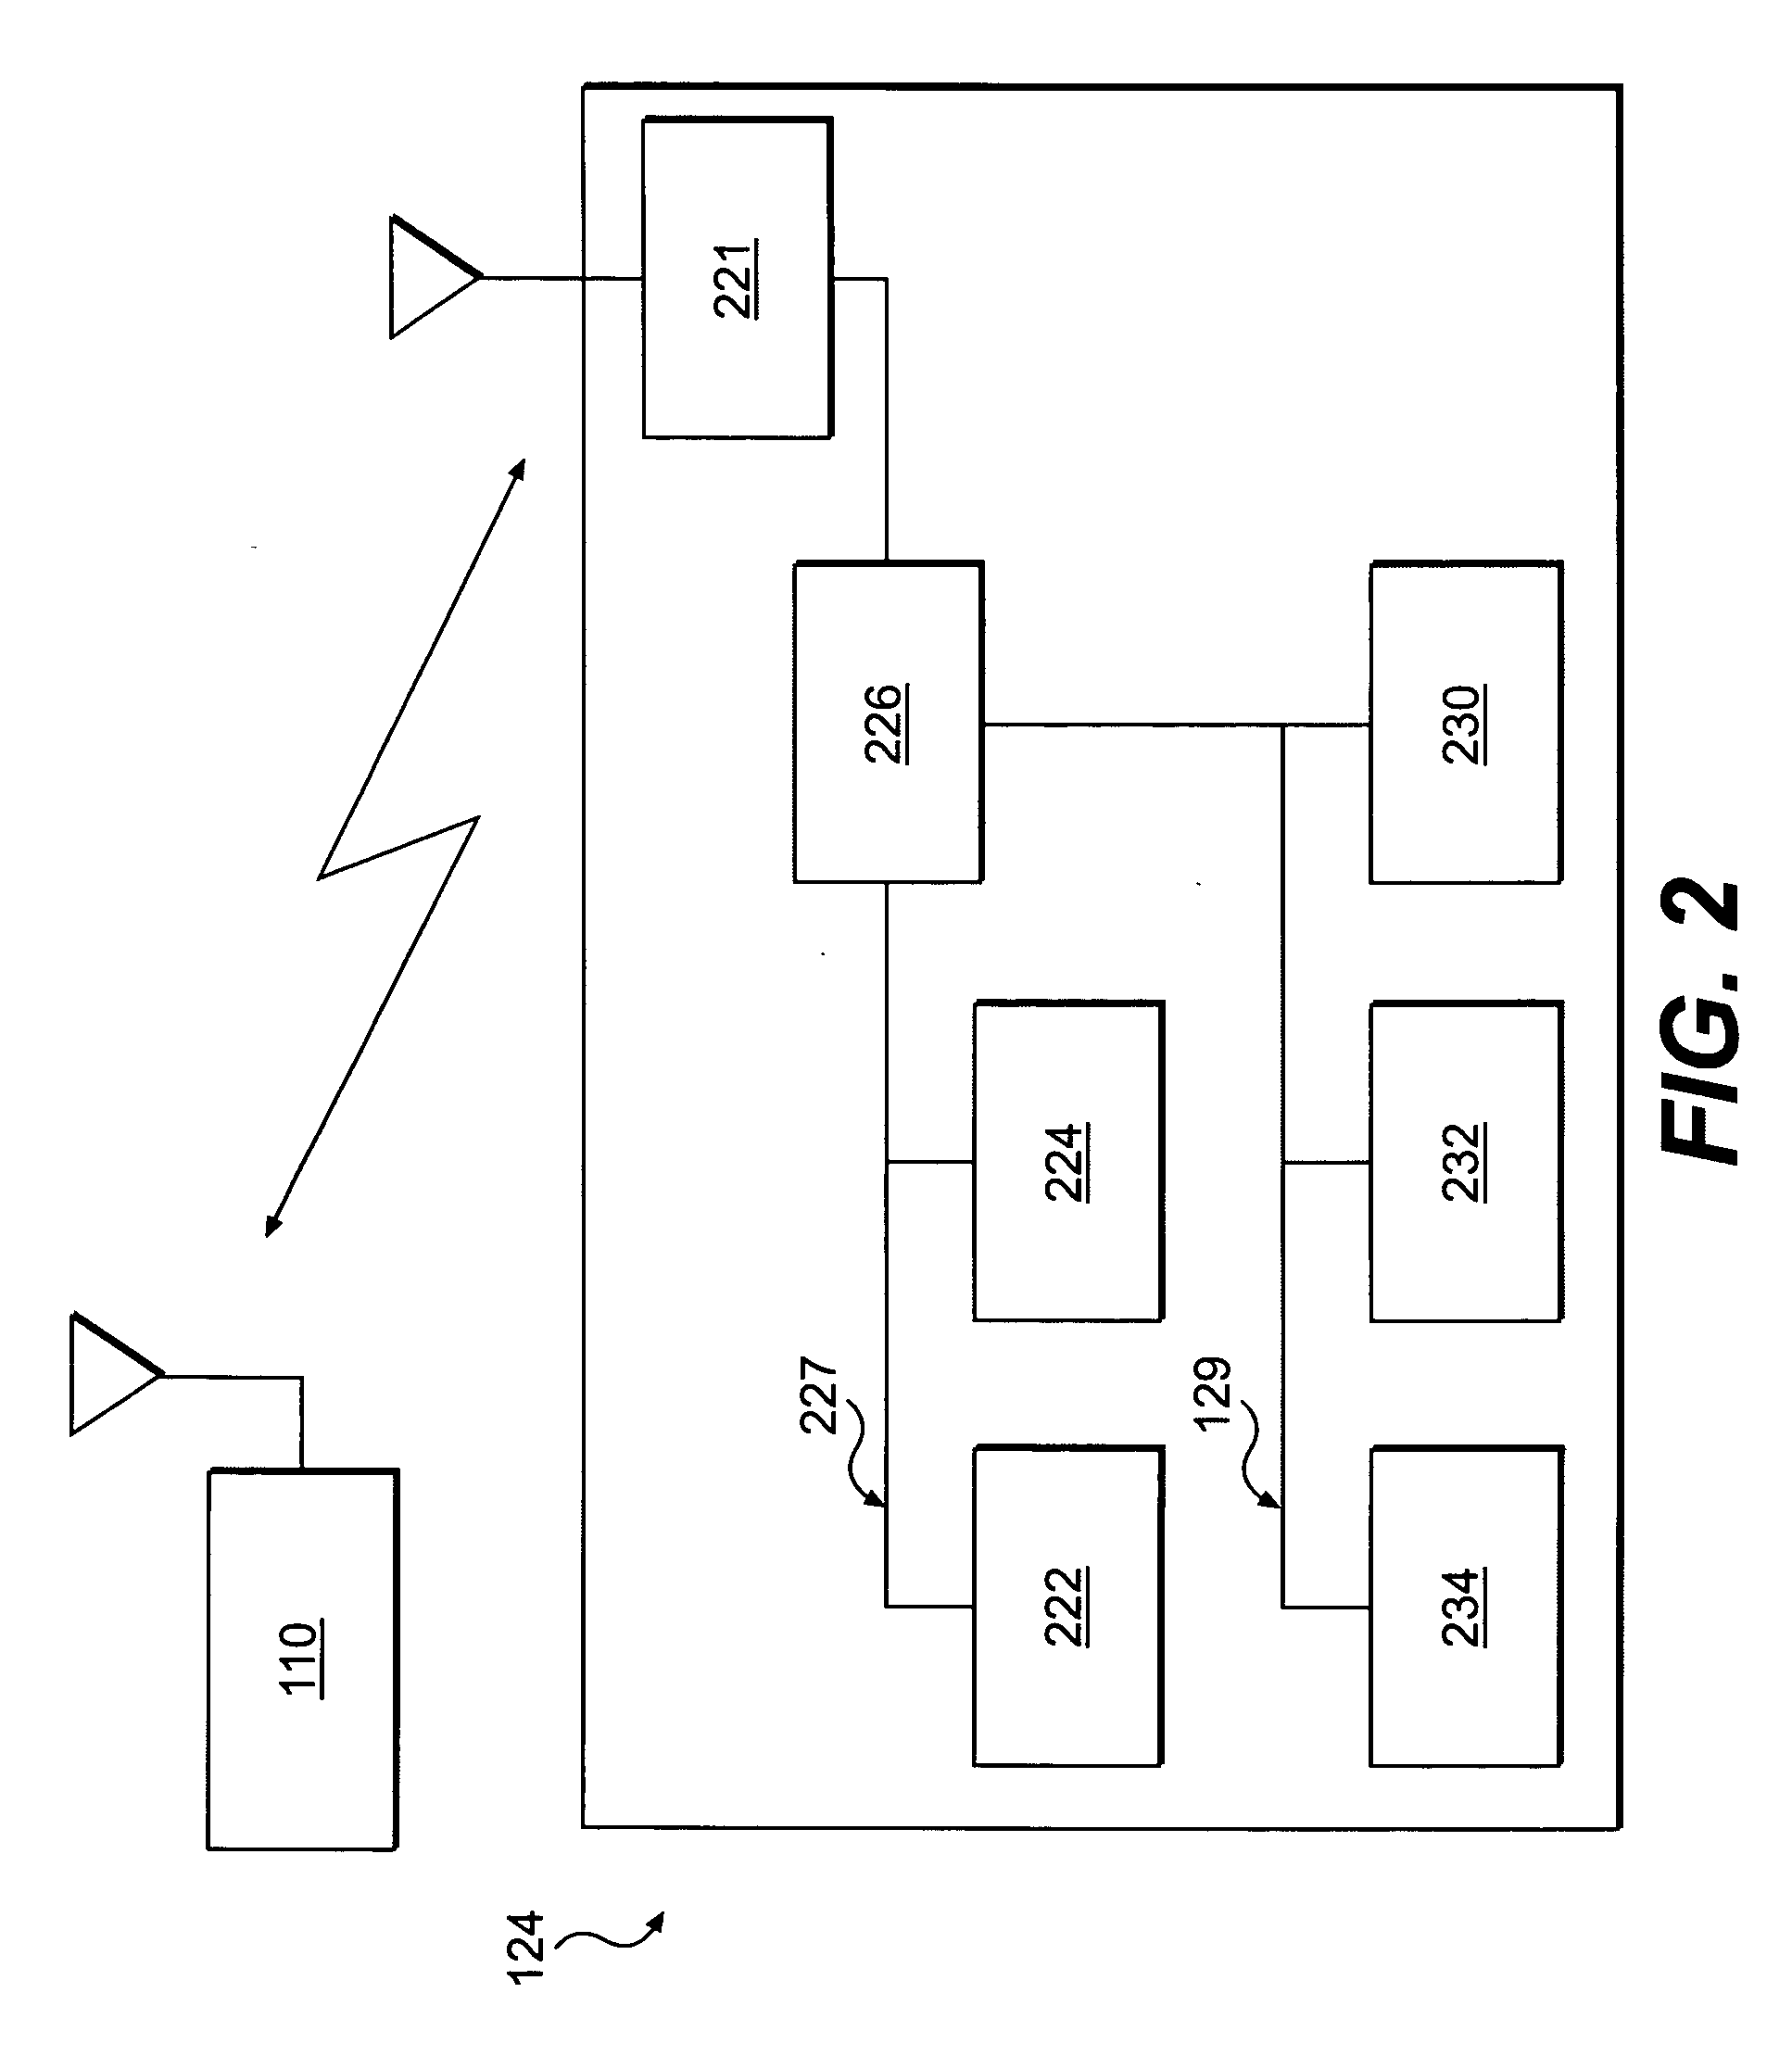 Systems and methods for controlling machine operations